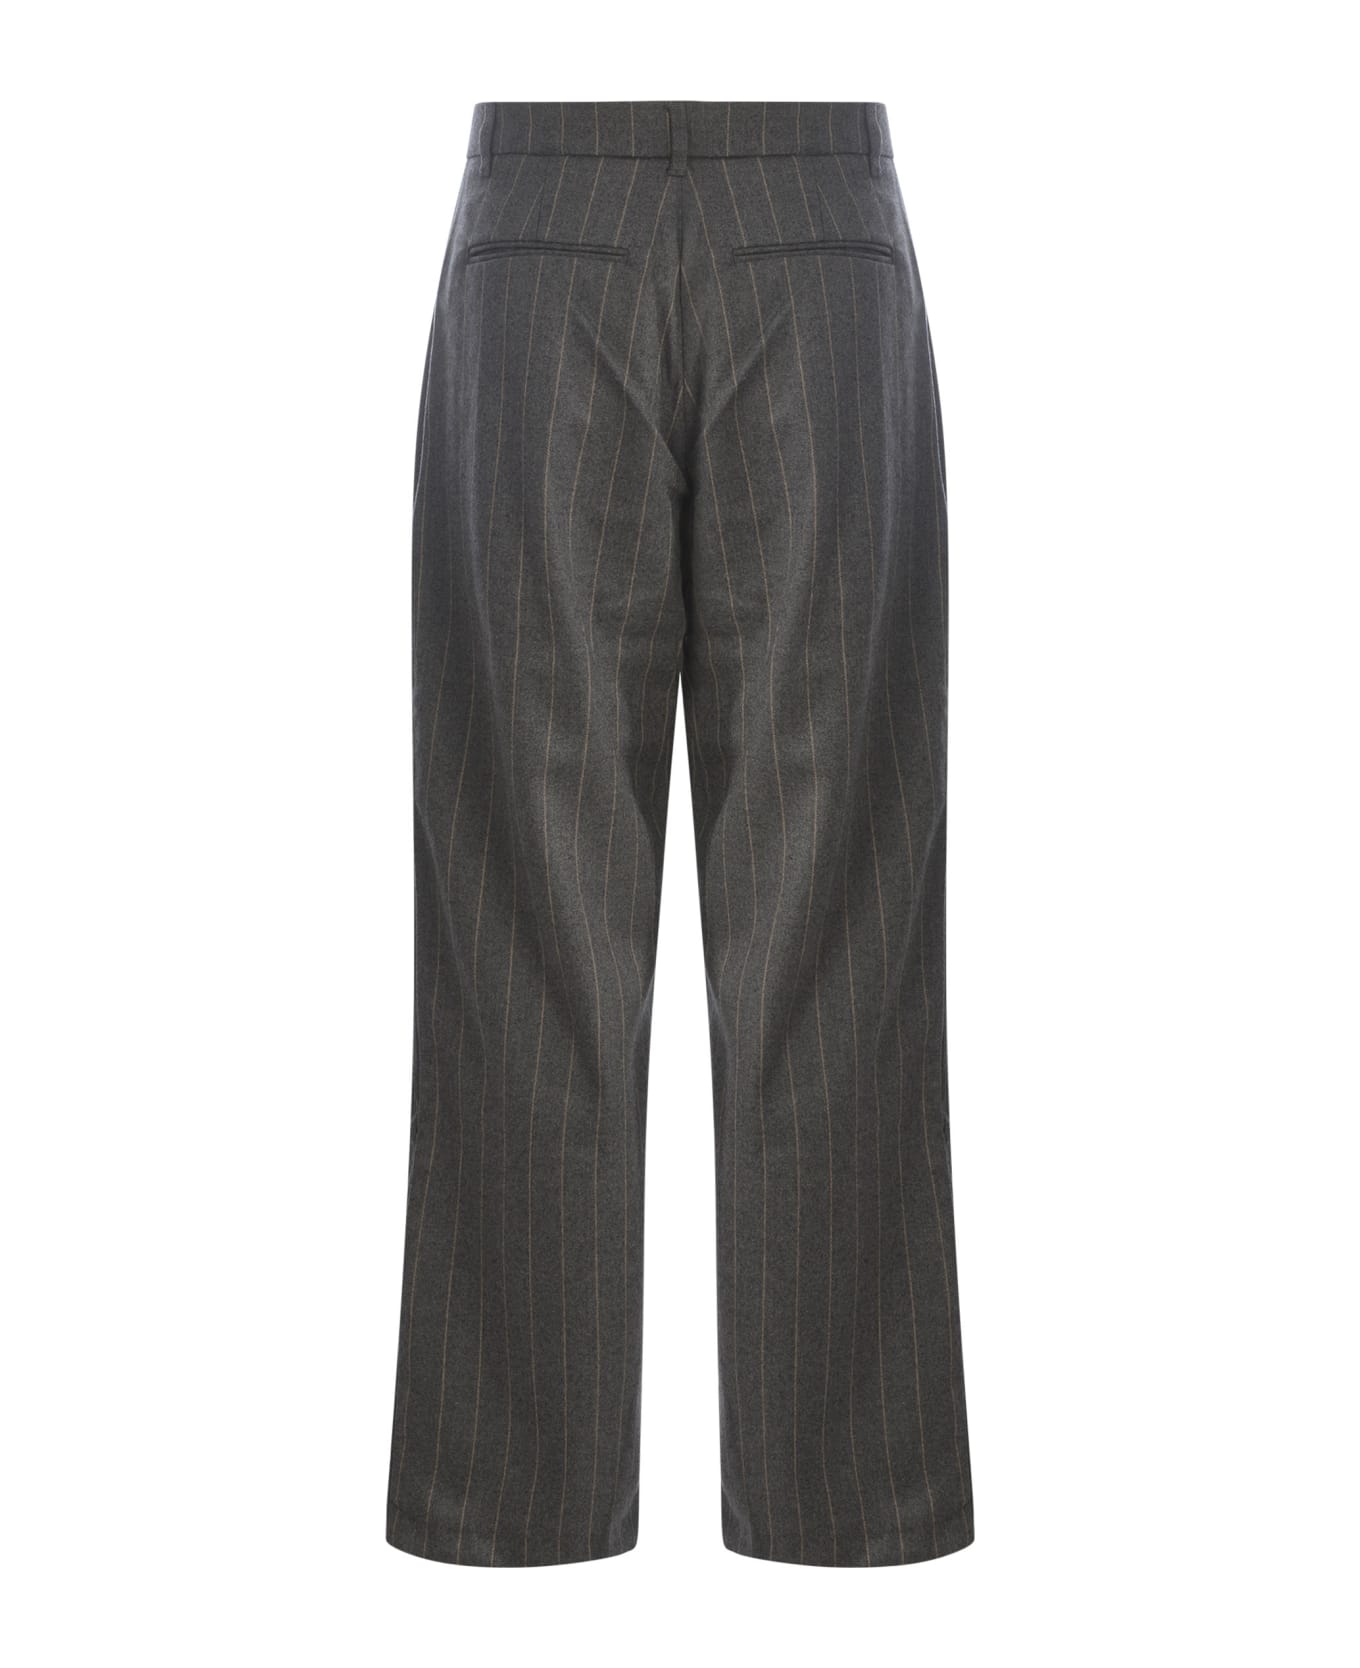 Family First Milano Trousers Family First "new Tube Classic" In Wool Blend - Grigio ボトムス